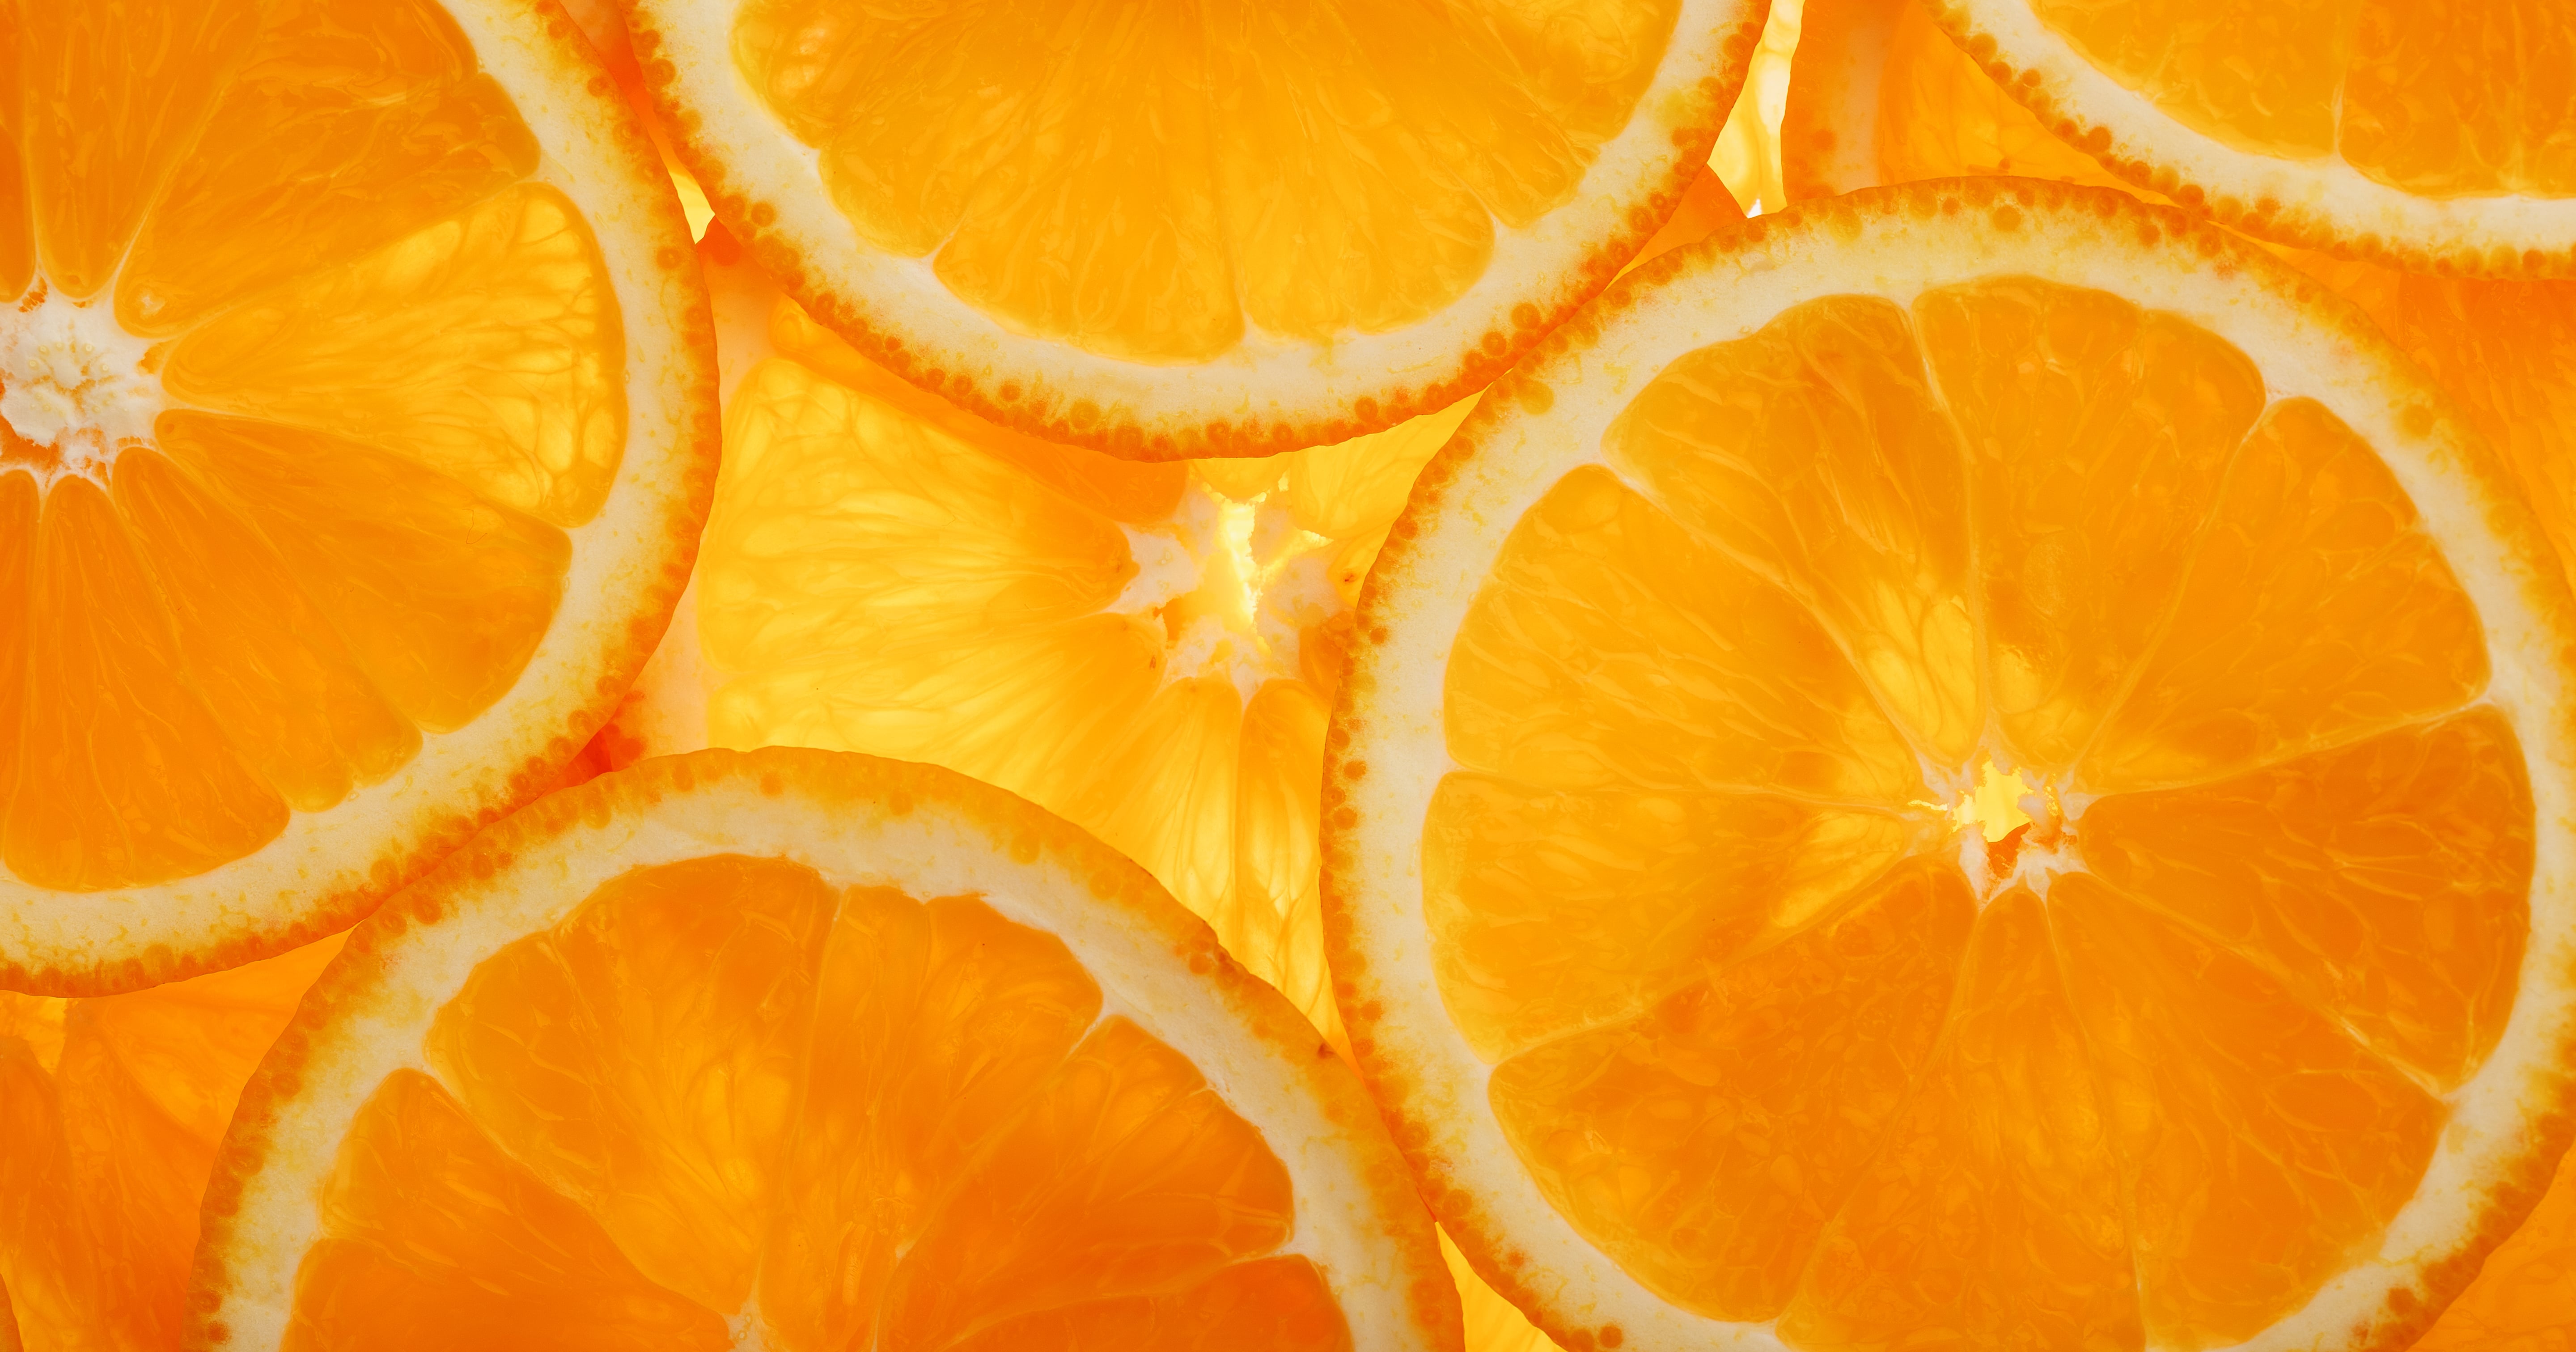 4 Editors Tested the Orange Peel Theory on Their Partners, and No, No One Broke Up